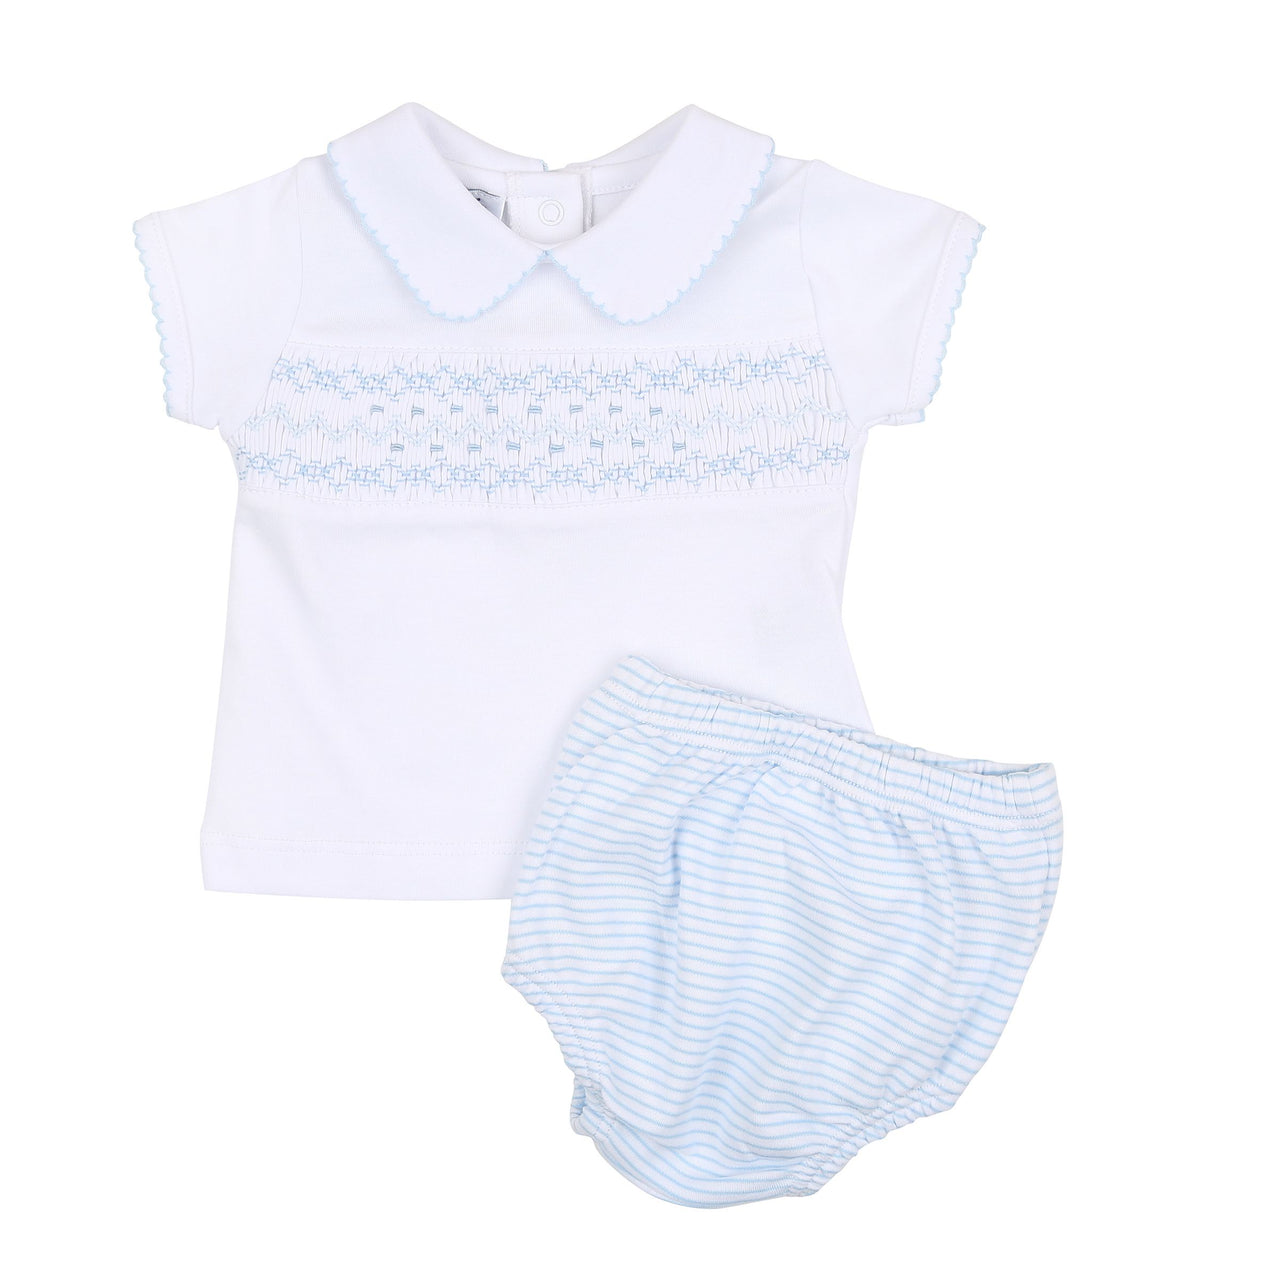 Magnolia Baby Arthur and Anna Smocked Collared Diaper Cover Set 1341-591-LB